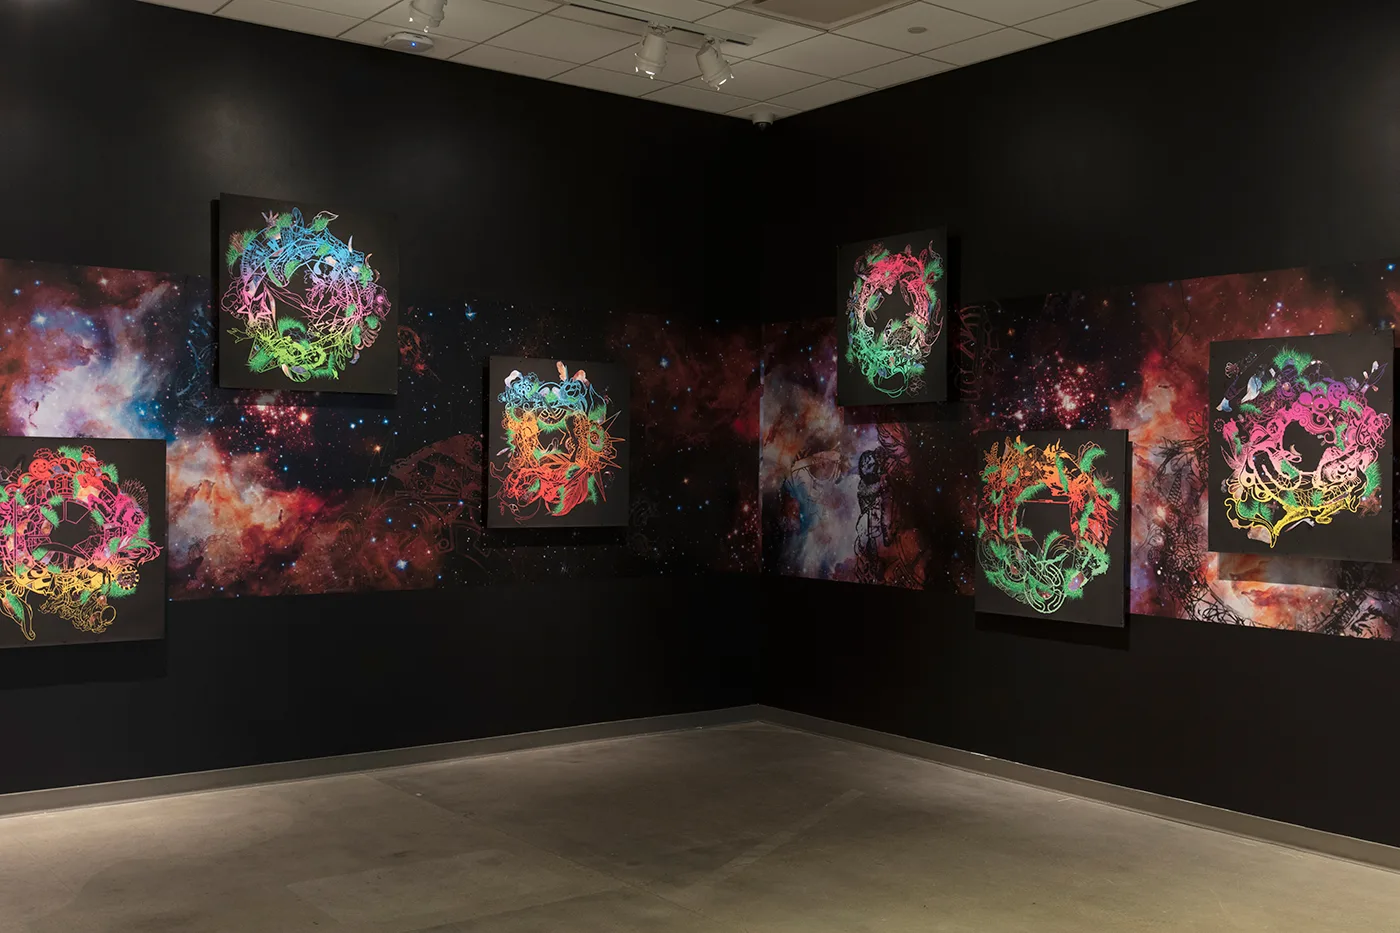 A selection of David Rios Ferreira's works on display at UMFA's Transcending Time and Space.